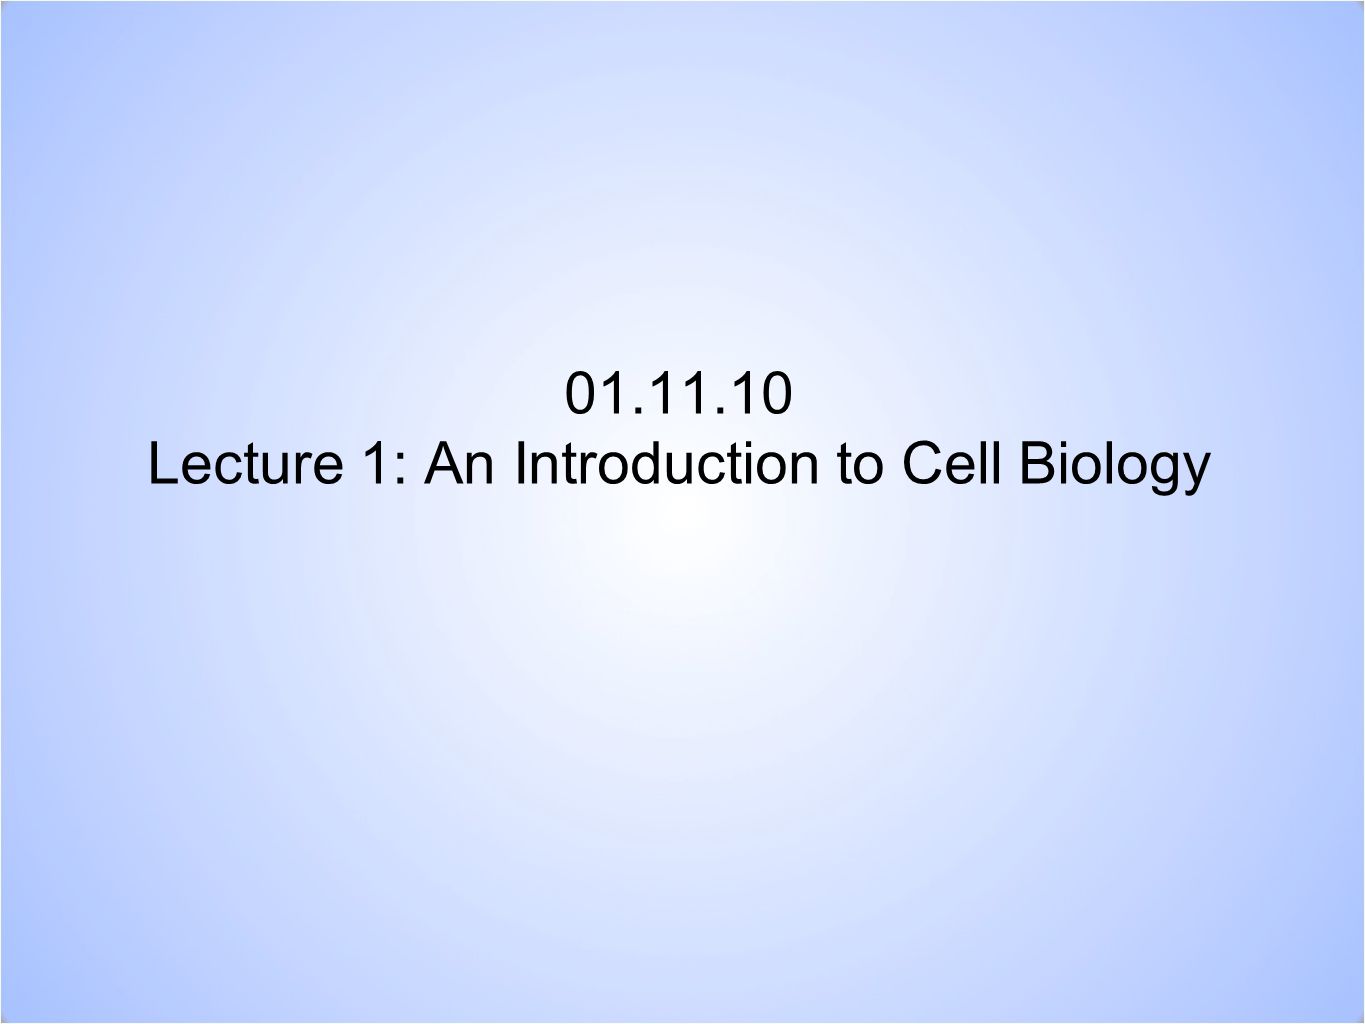 Lecture 1: An Introduction to Cell Biology